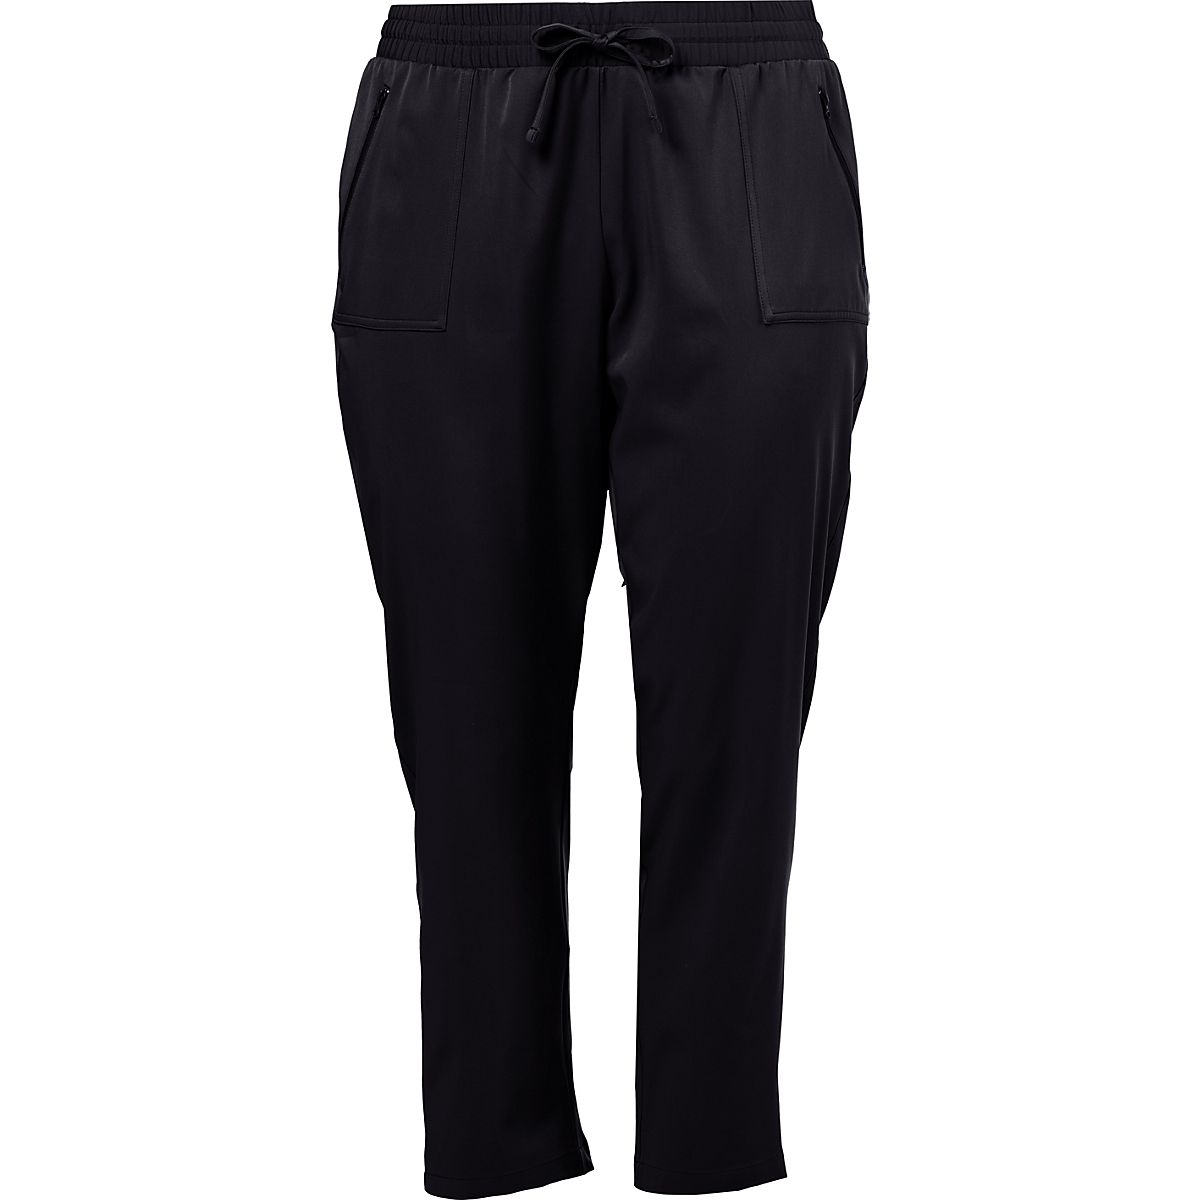 Magellan Outdoors Women's Lost Pines Stretch Plus Size Travel